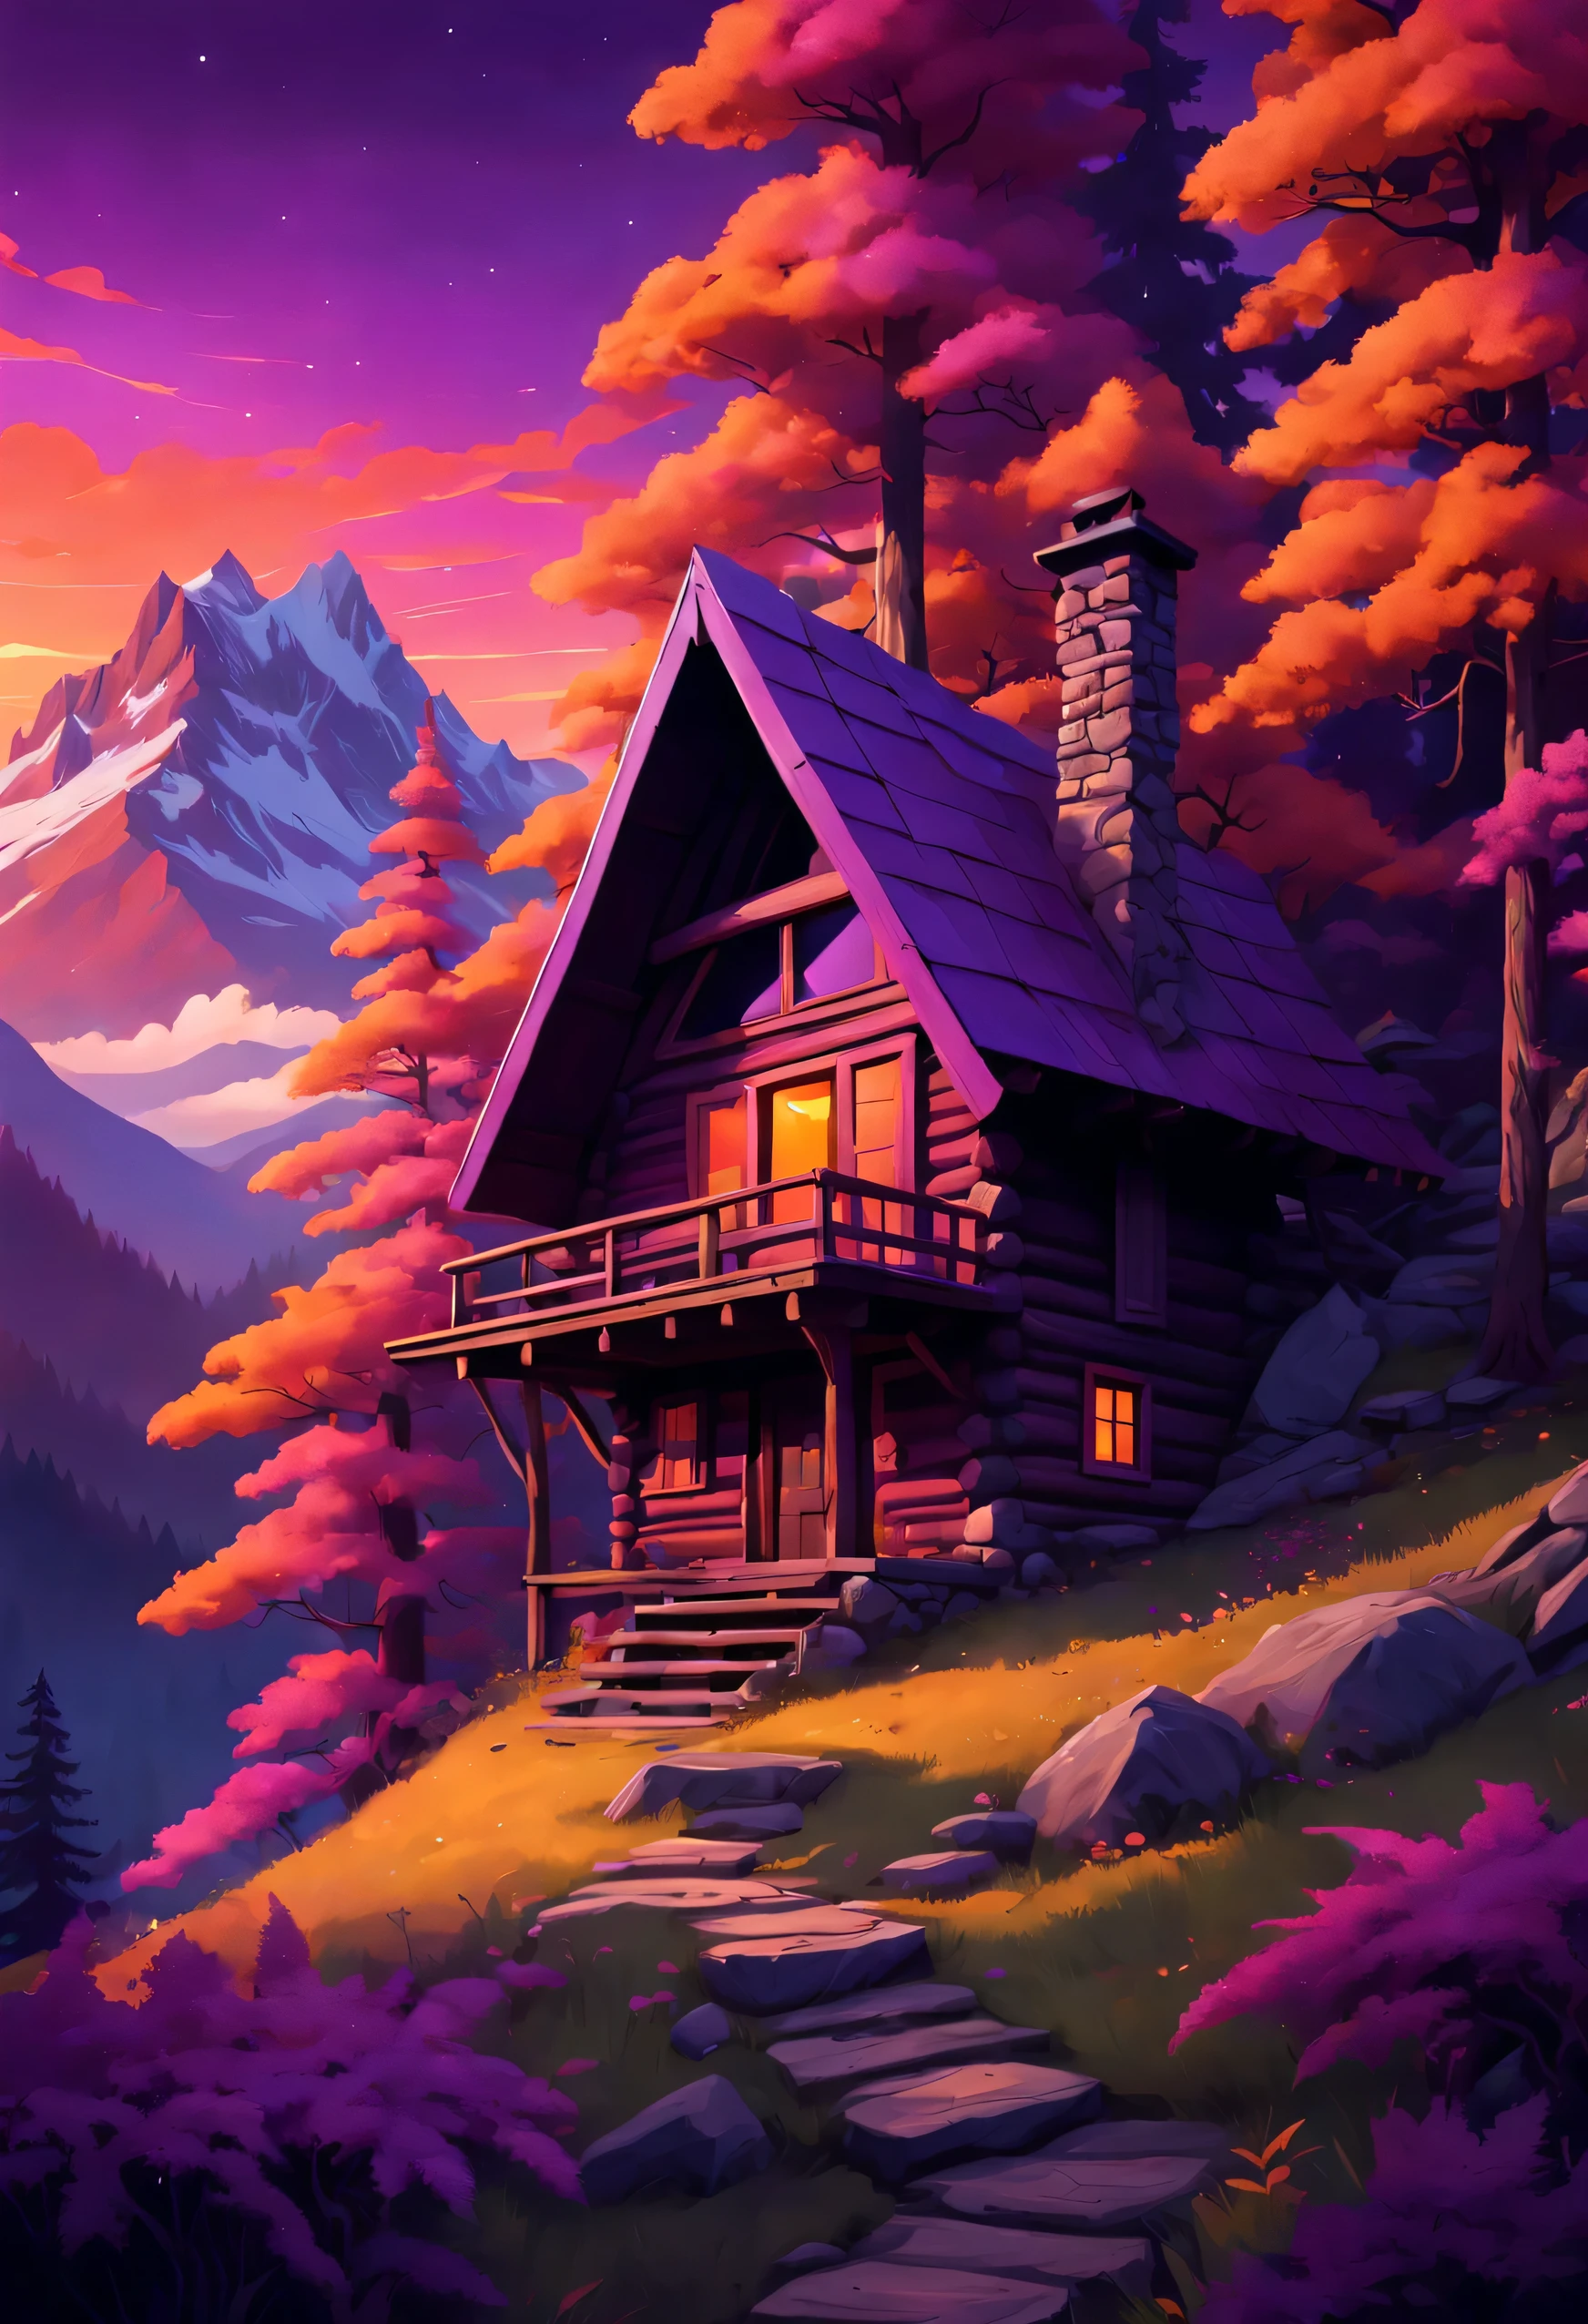 Mysterious mountain cabin nestled amongst dense, psychedelic forests, with a breathtaking sunset sky casting vibrant, warm hues of purple, pink and orange, creating an atmosphere of curiosity and intrigue.